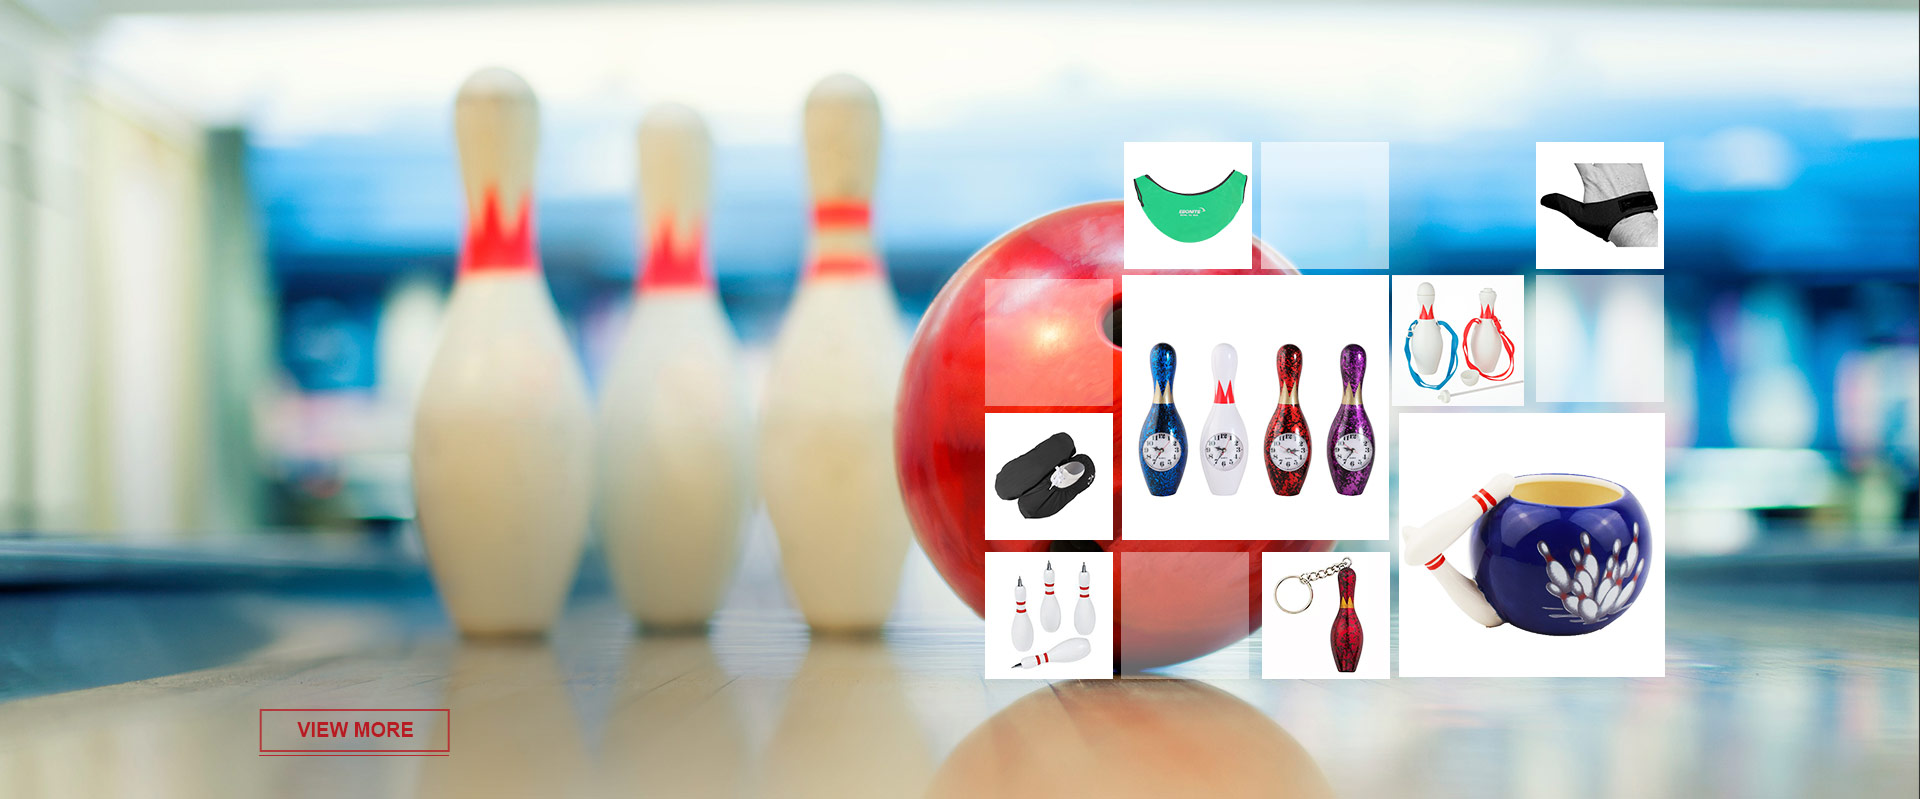 Bowling Promotion Gift